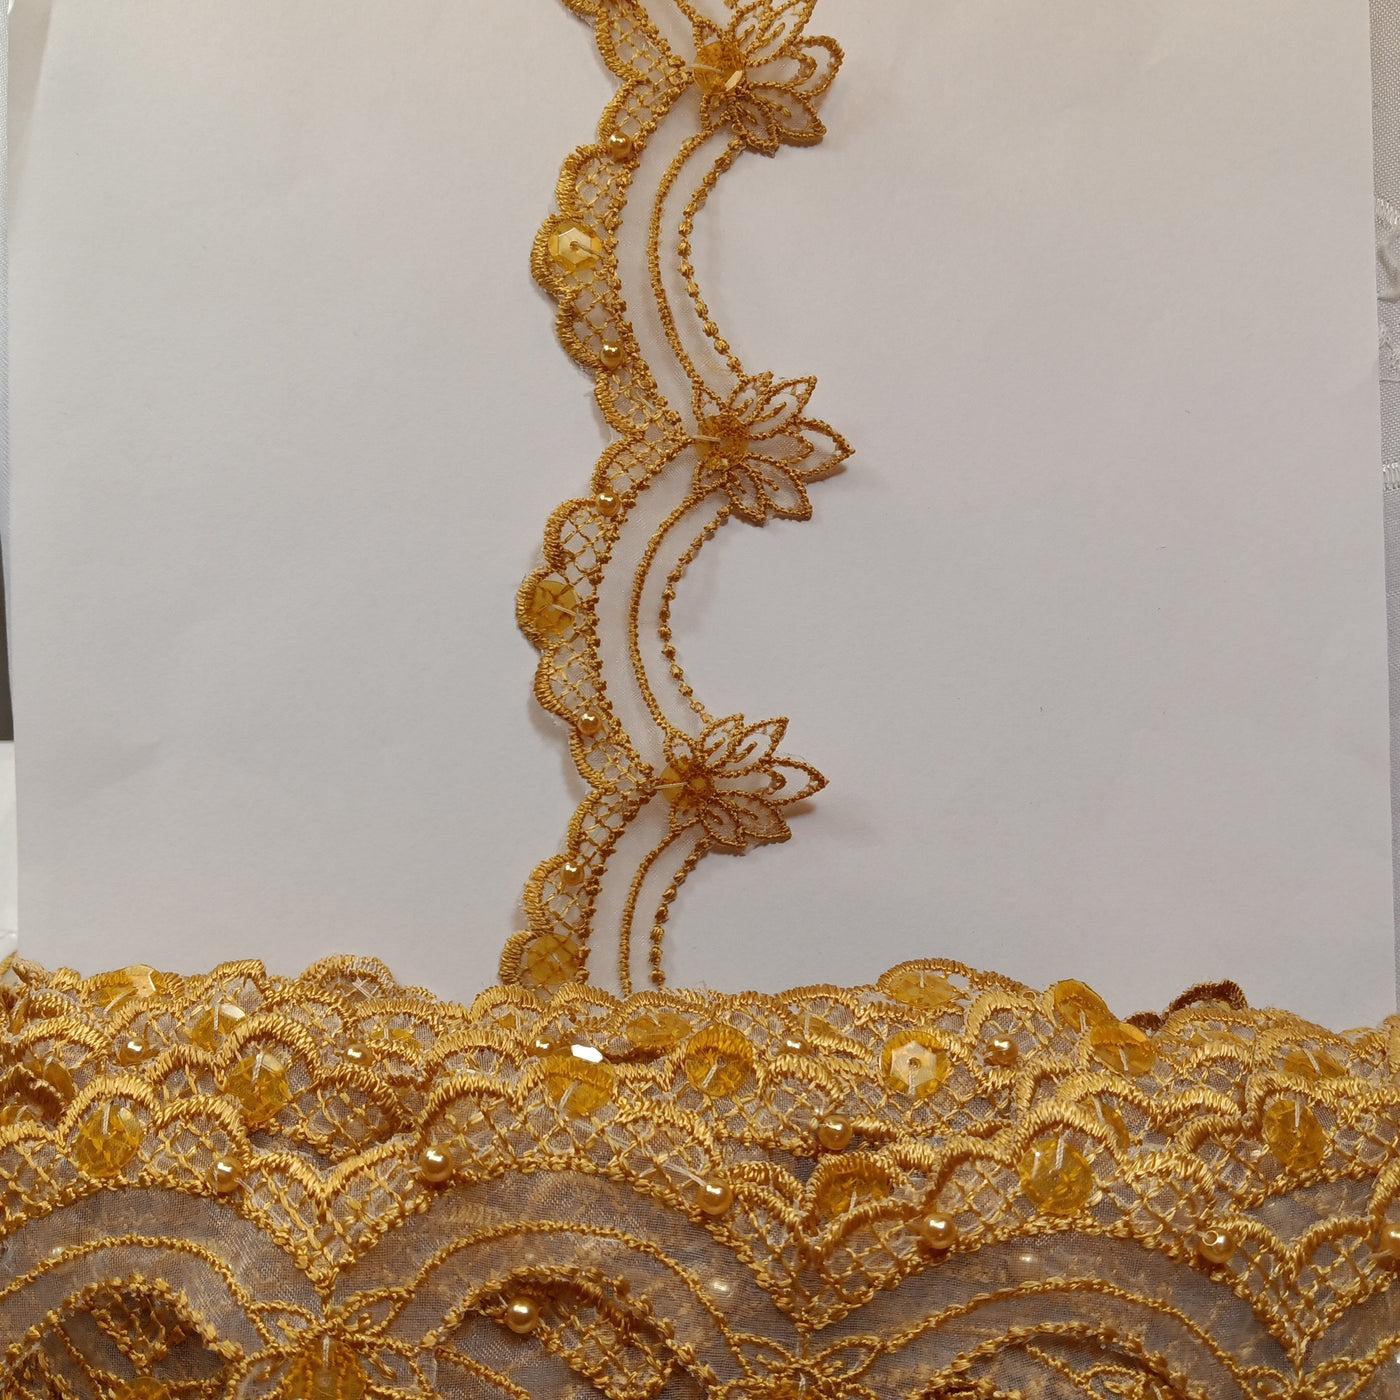 Beaded Camel Lace Trim Embroidered on 100% Polyester Organza . Large Arch Scalloped Trim. Formal Trim. Perfect for Edging and Gowns.  Sold by the Yard.  Lace Usa